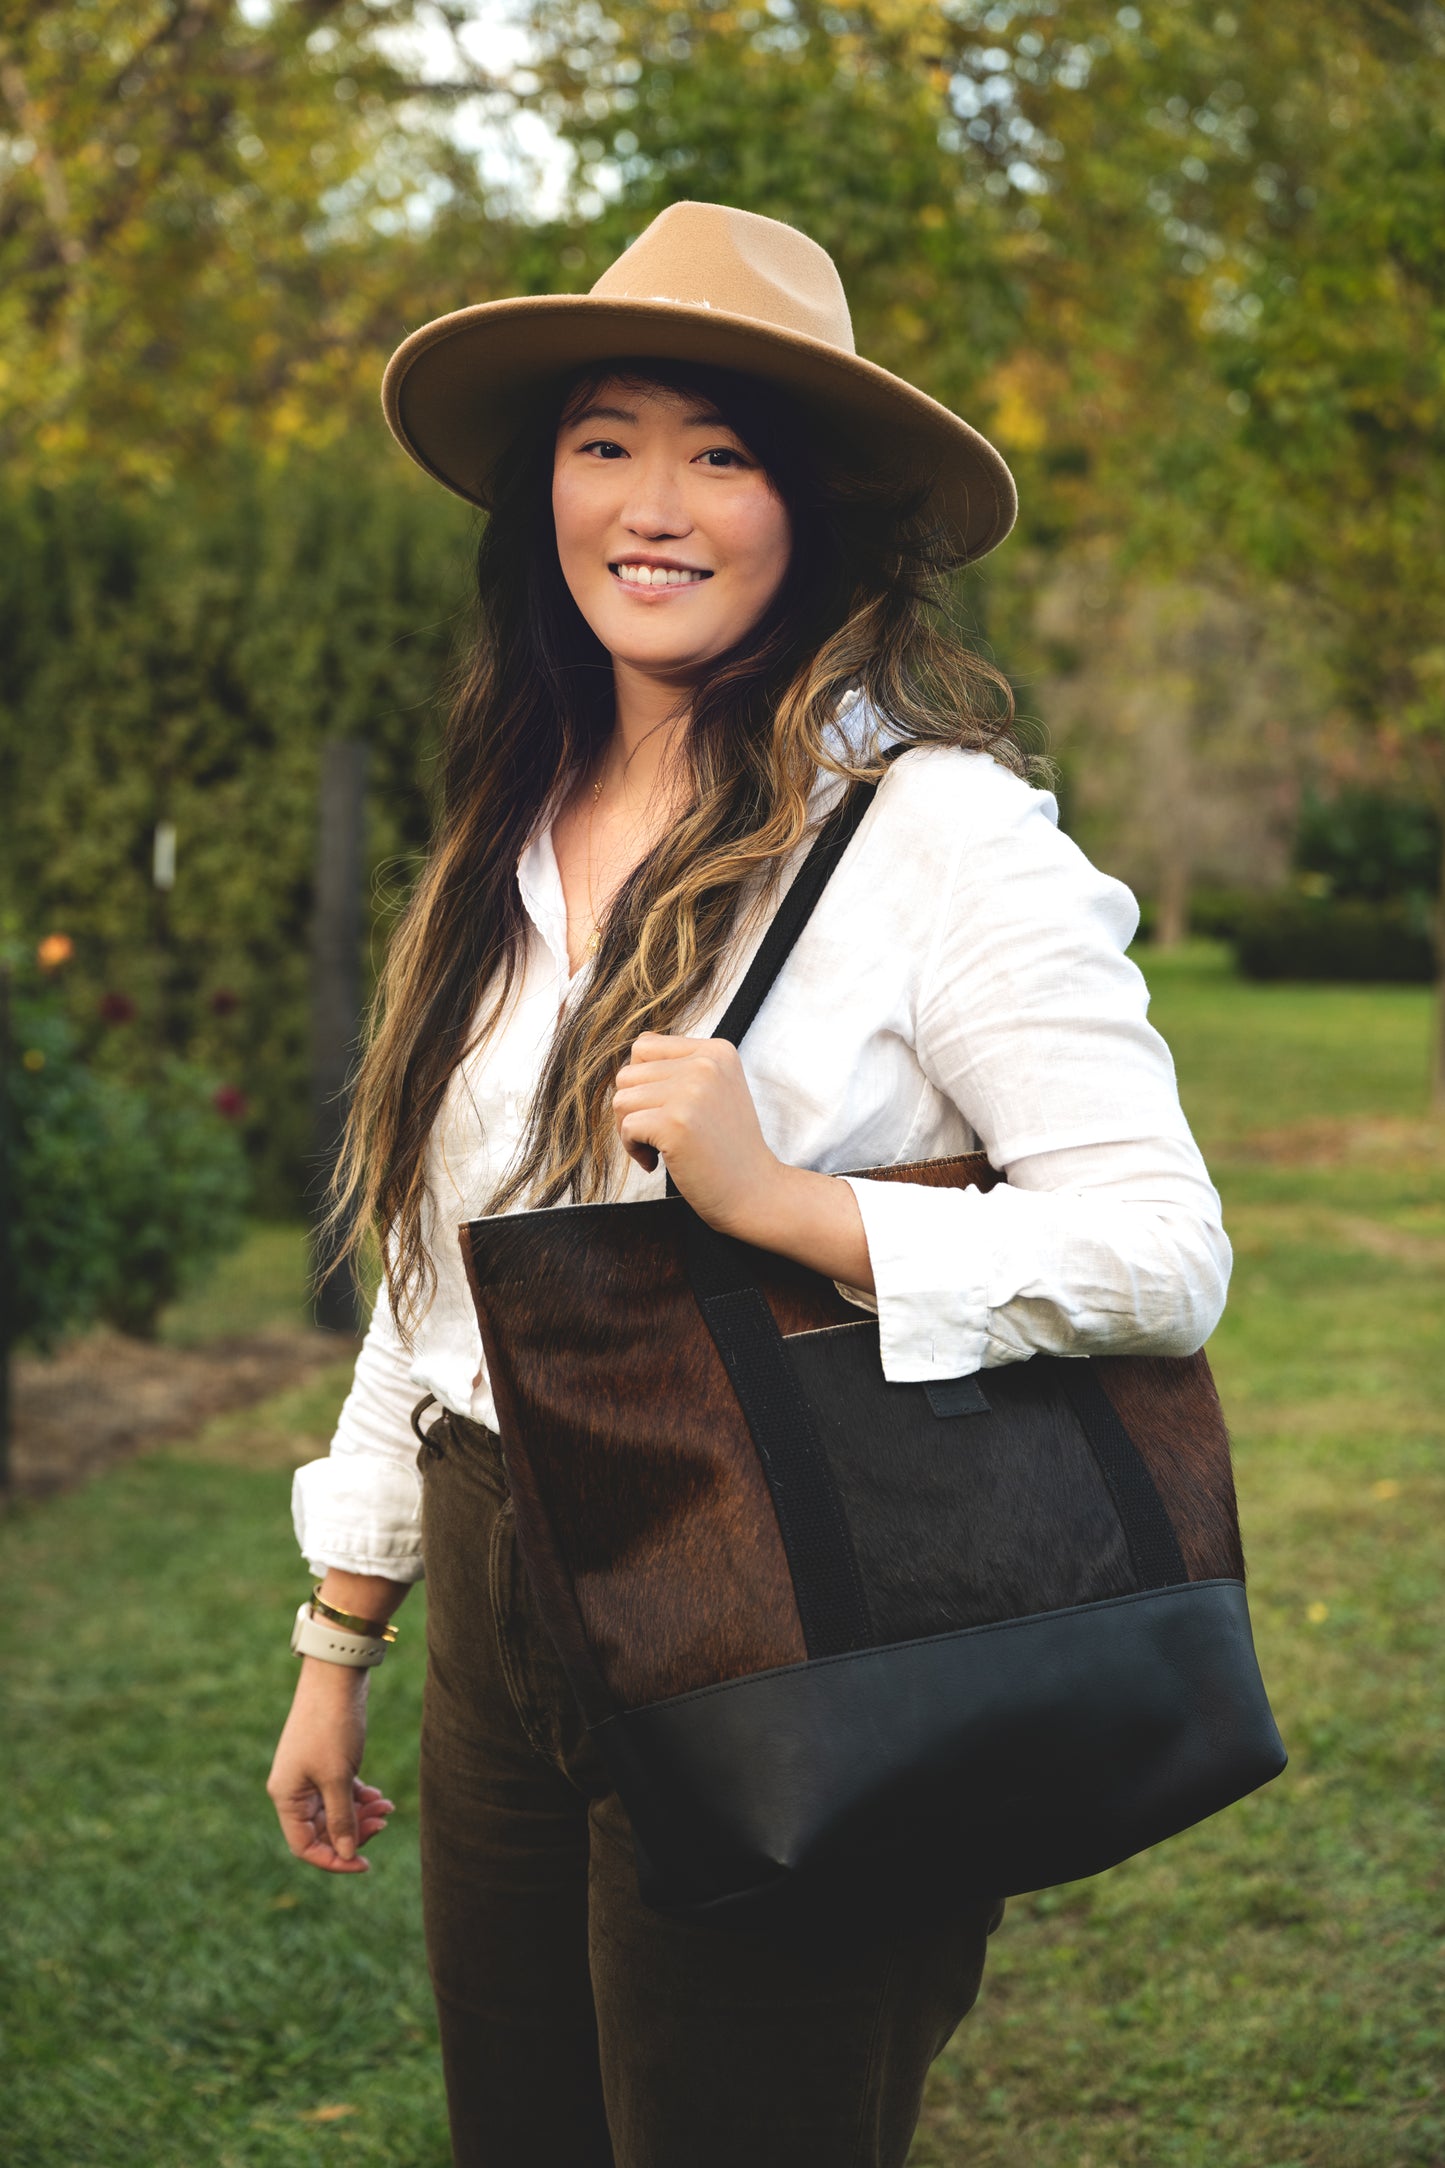 Utility Tote: Leather on Leather